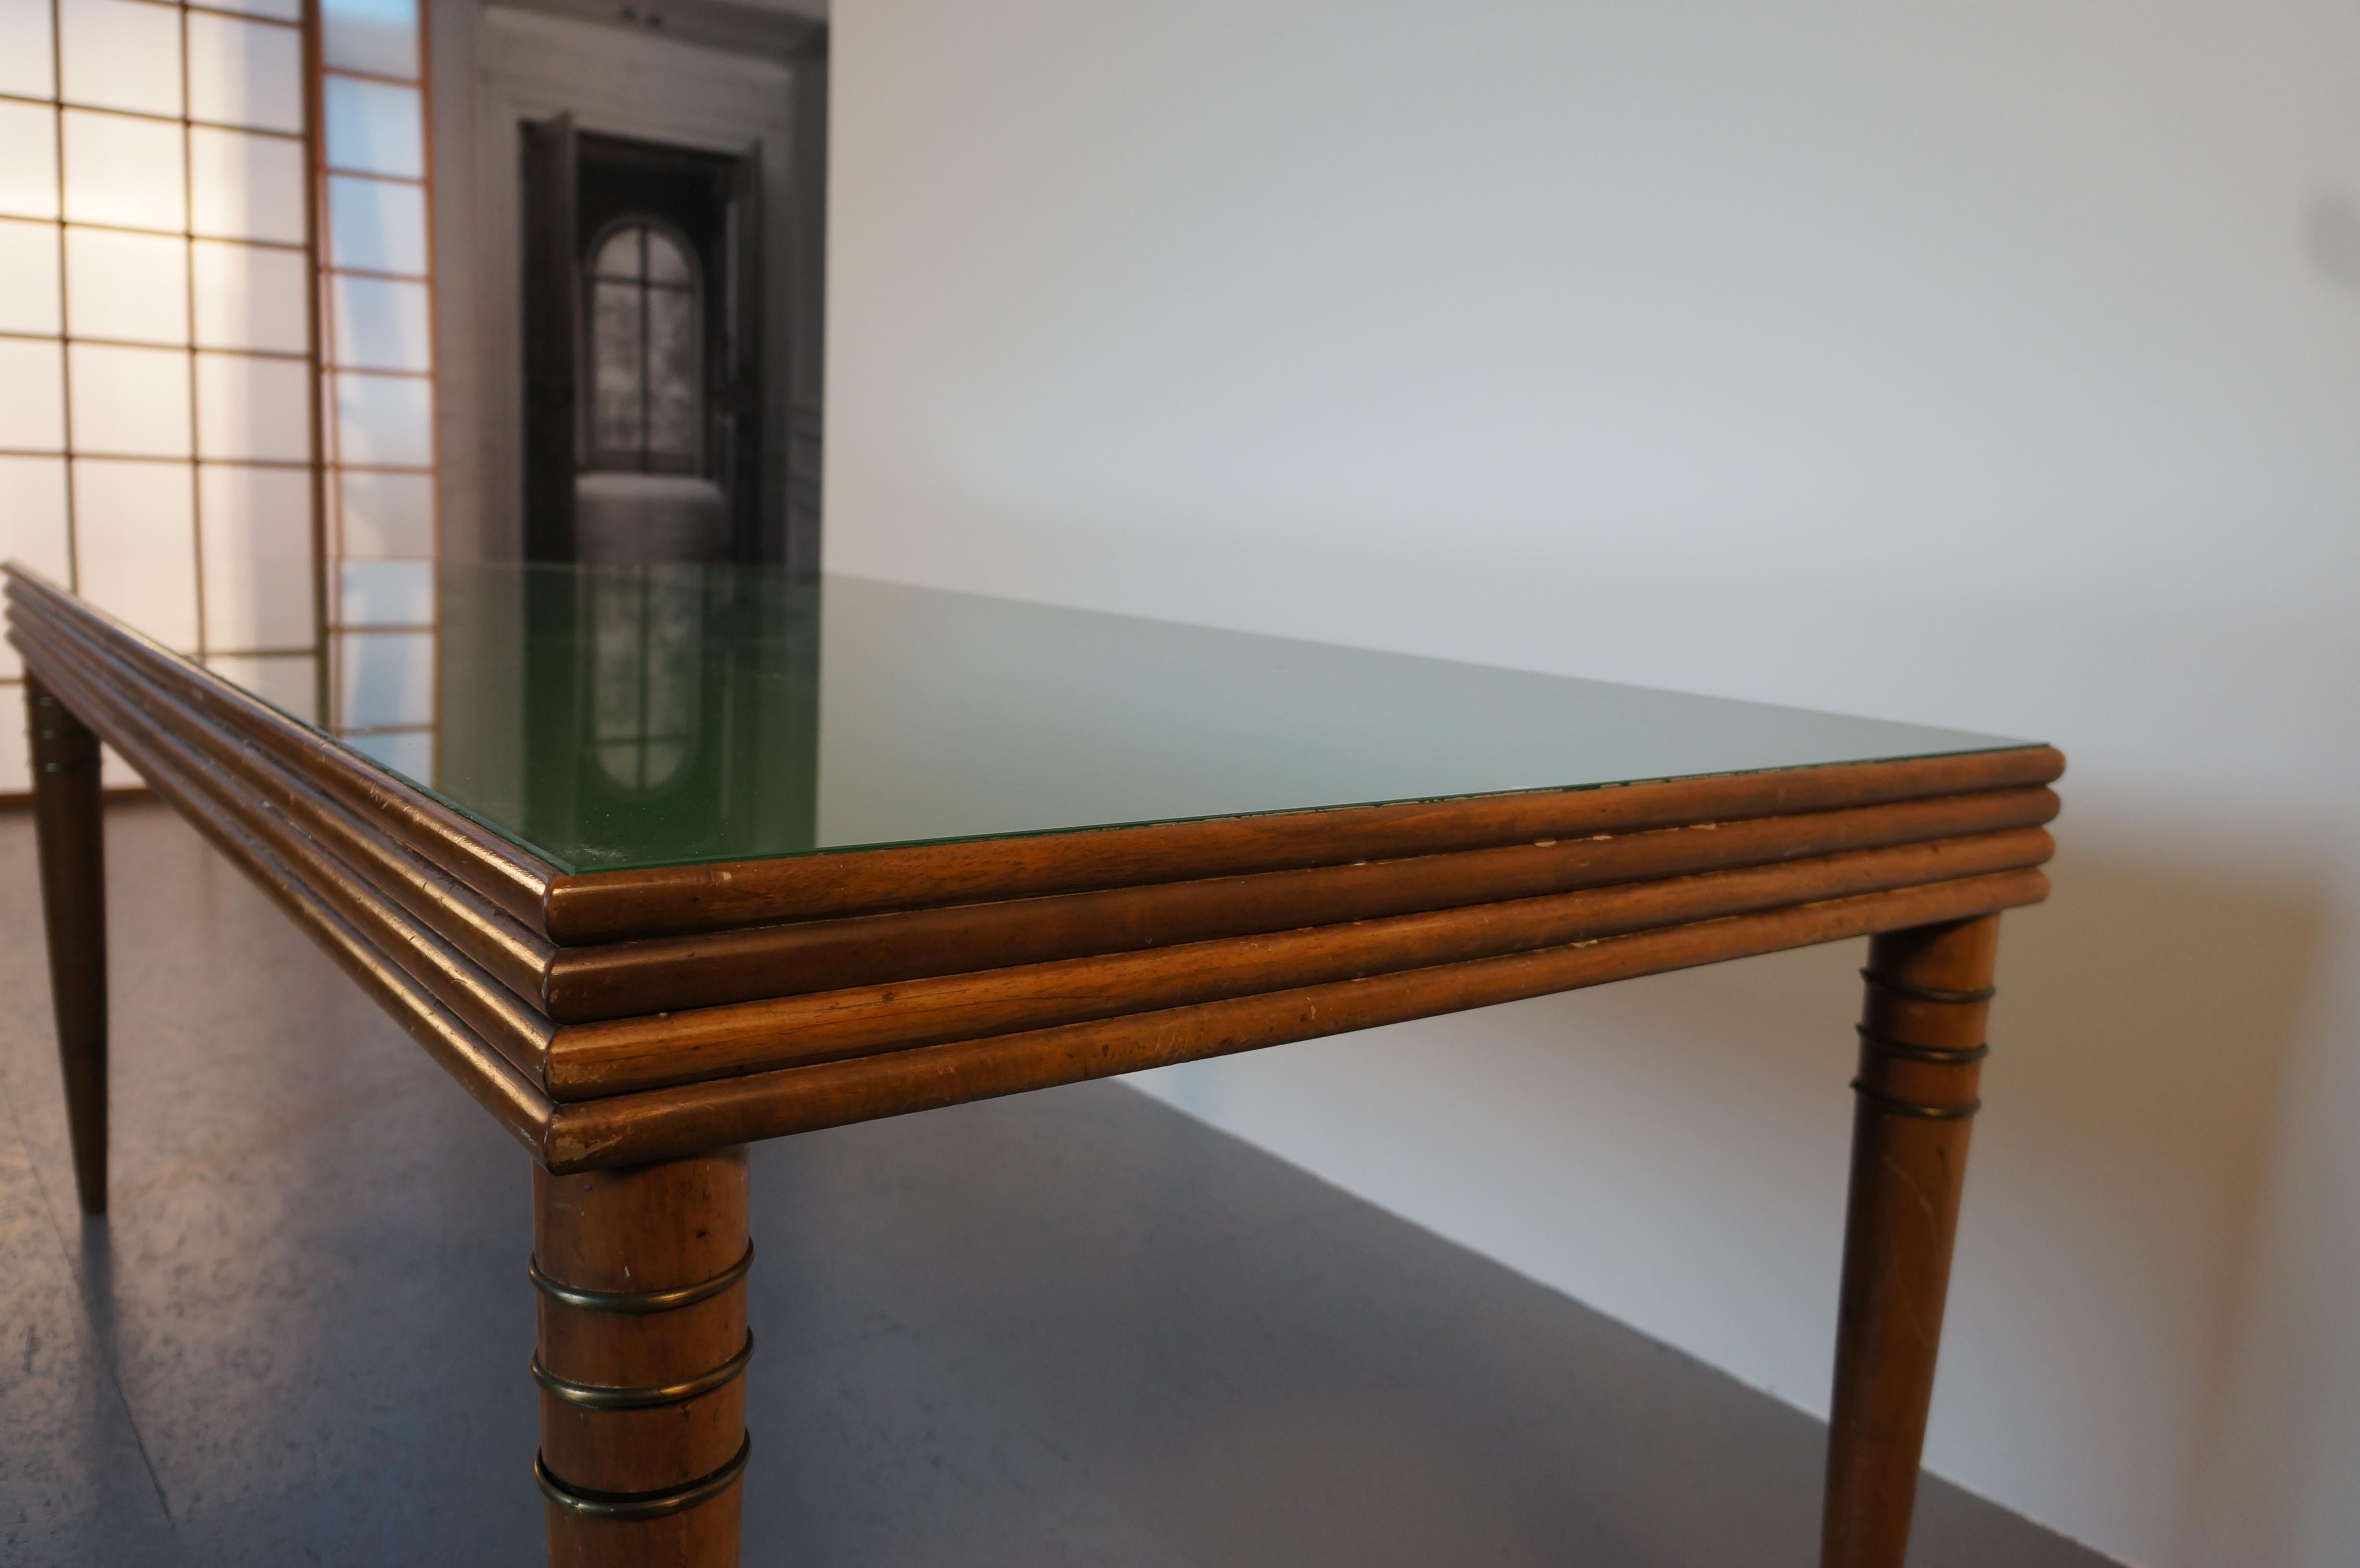 Vintage British racing green table with coned legs. On top a beautiful green glass plate surrounded by ridged wood frame. Its tapered legs are accented by brass rings.